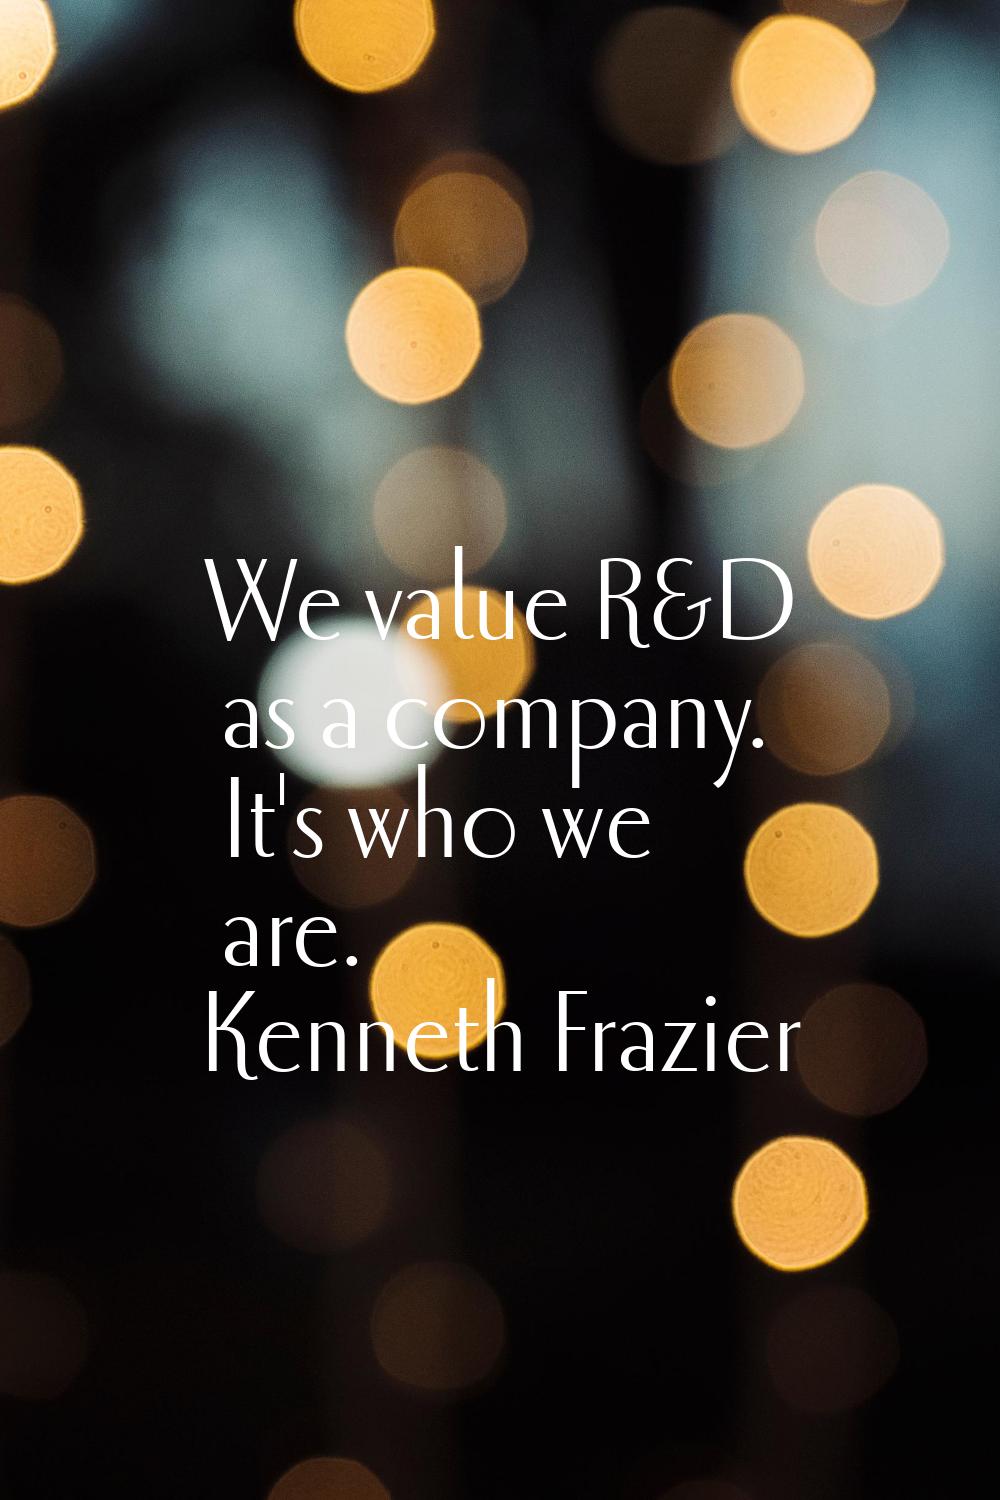 We value R&D as a company. It's who we are.